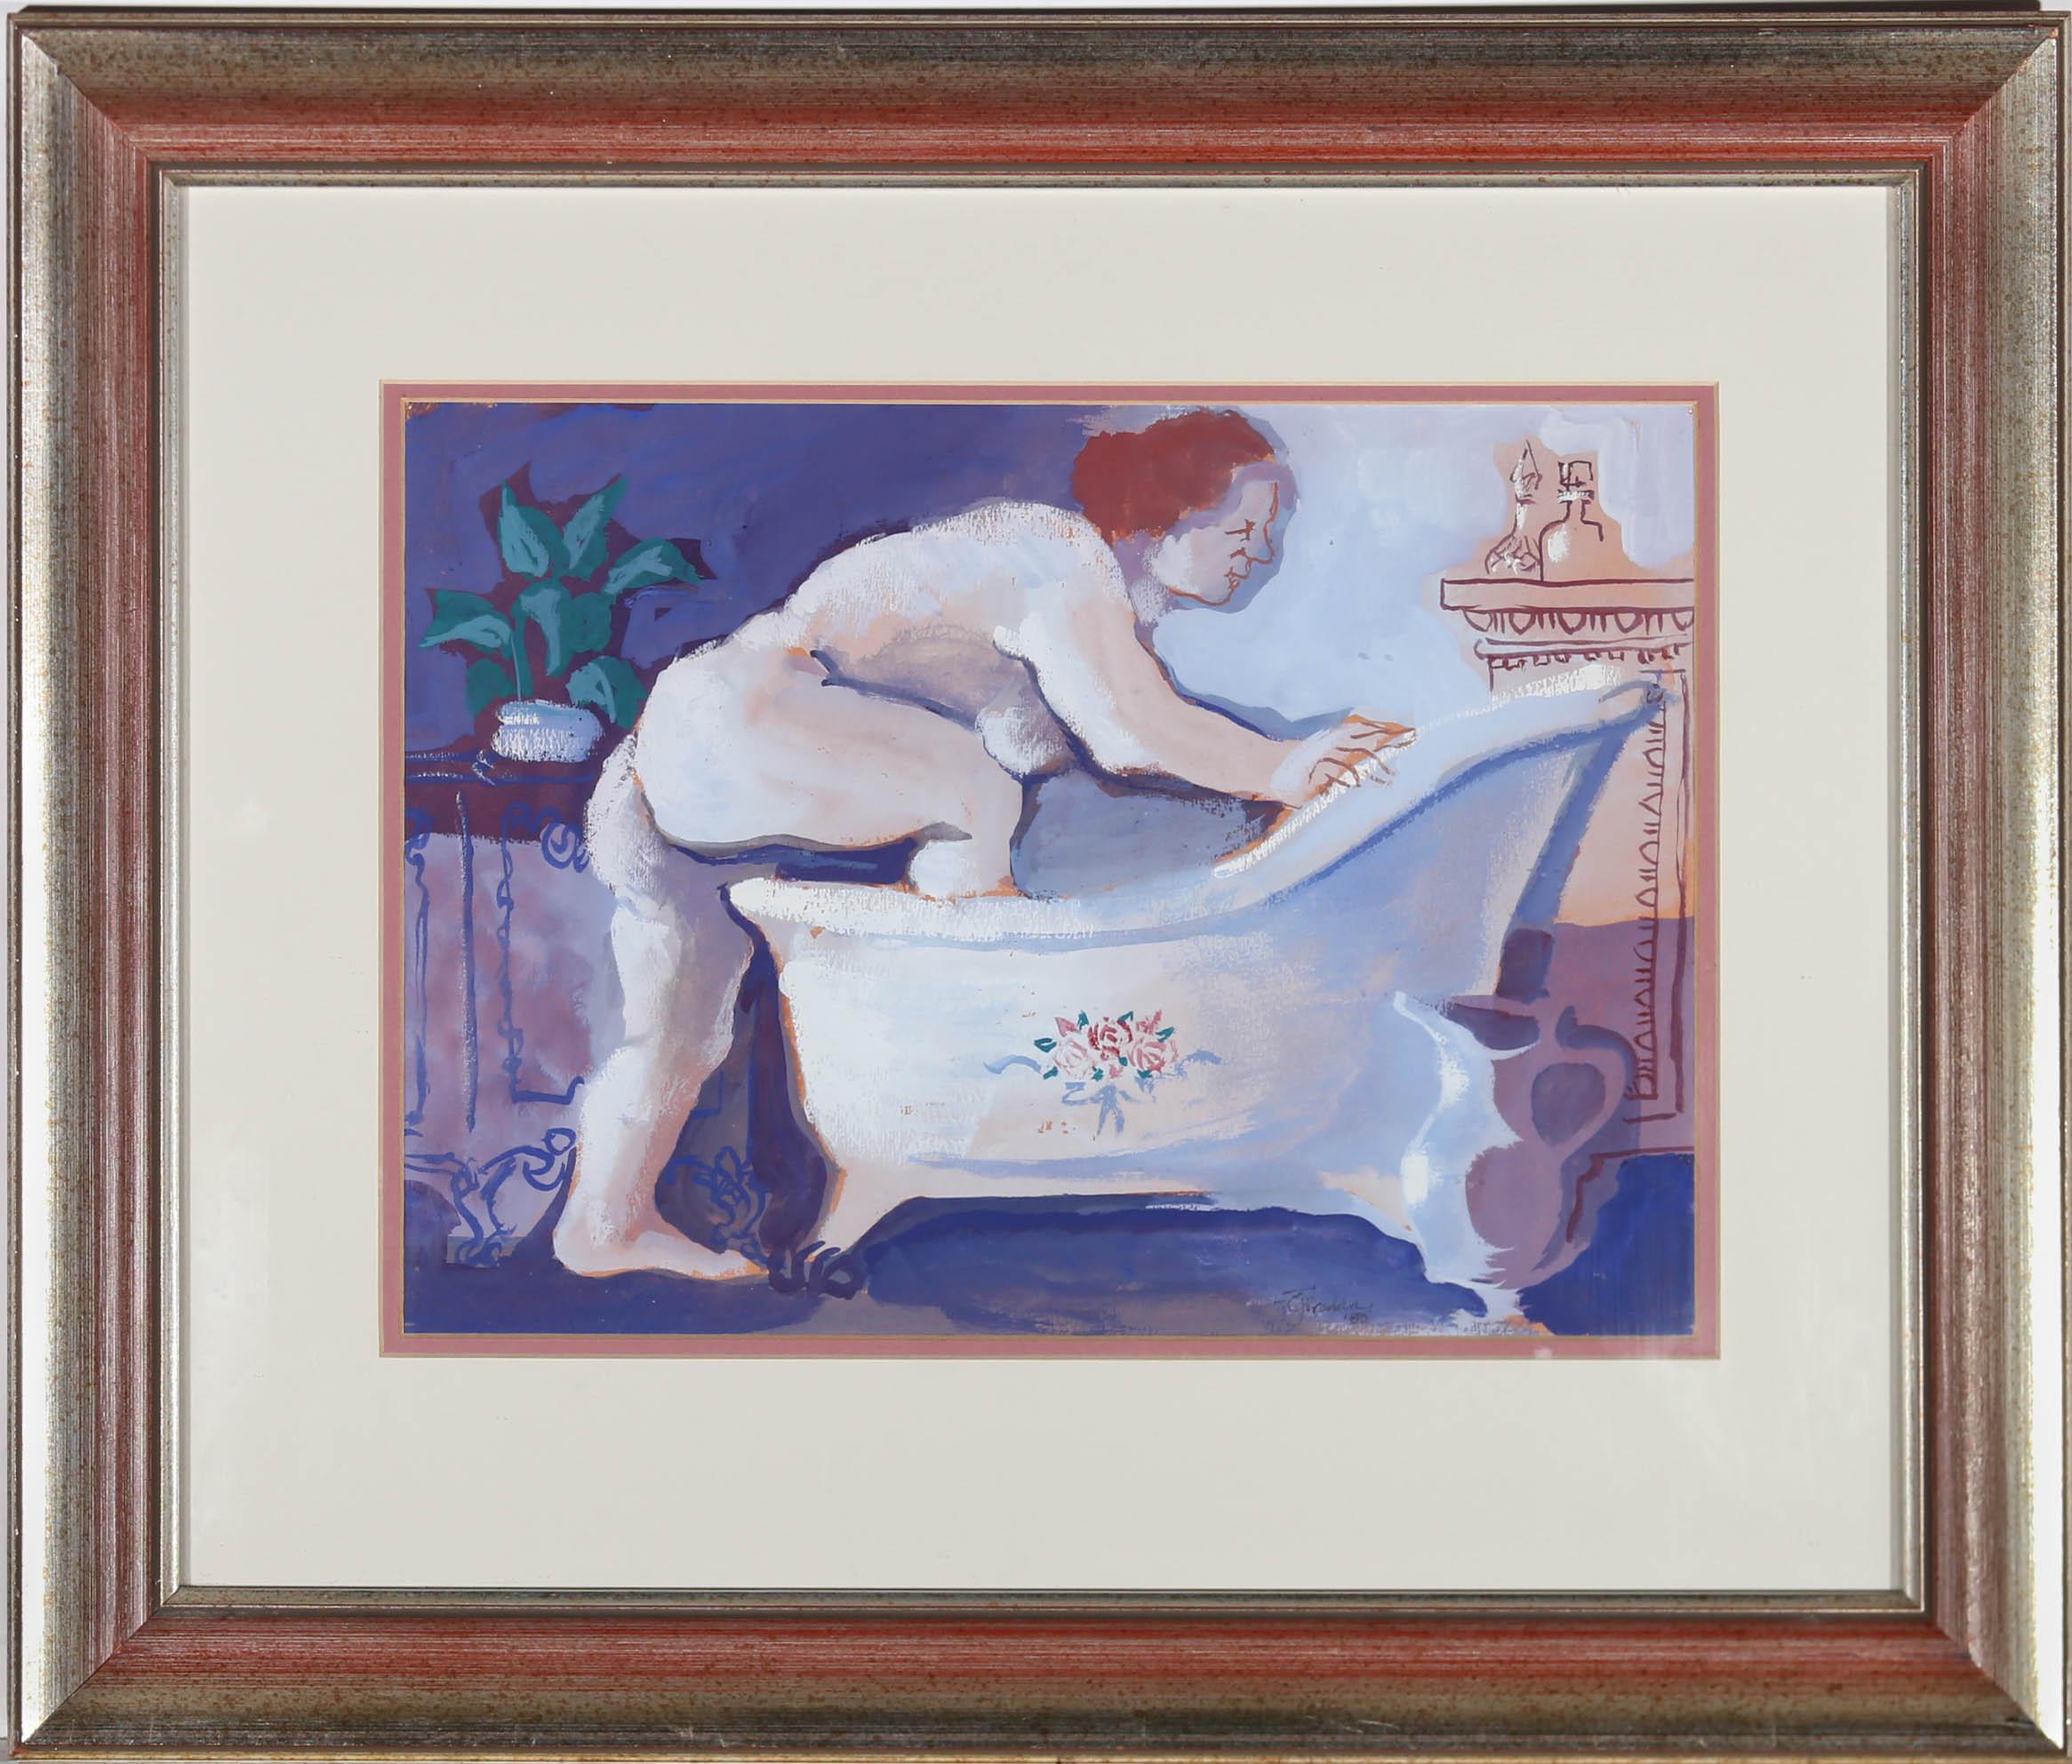 A eye-catching study by Cyril Fradan, depicting a nude figure climbing into a beautiful freestanding bath. The scene has been painted in all shades of purple to represented evening light, with clouds of steam rising from the tub on the right-hand